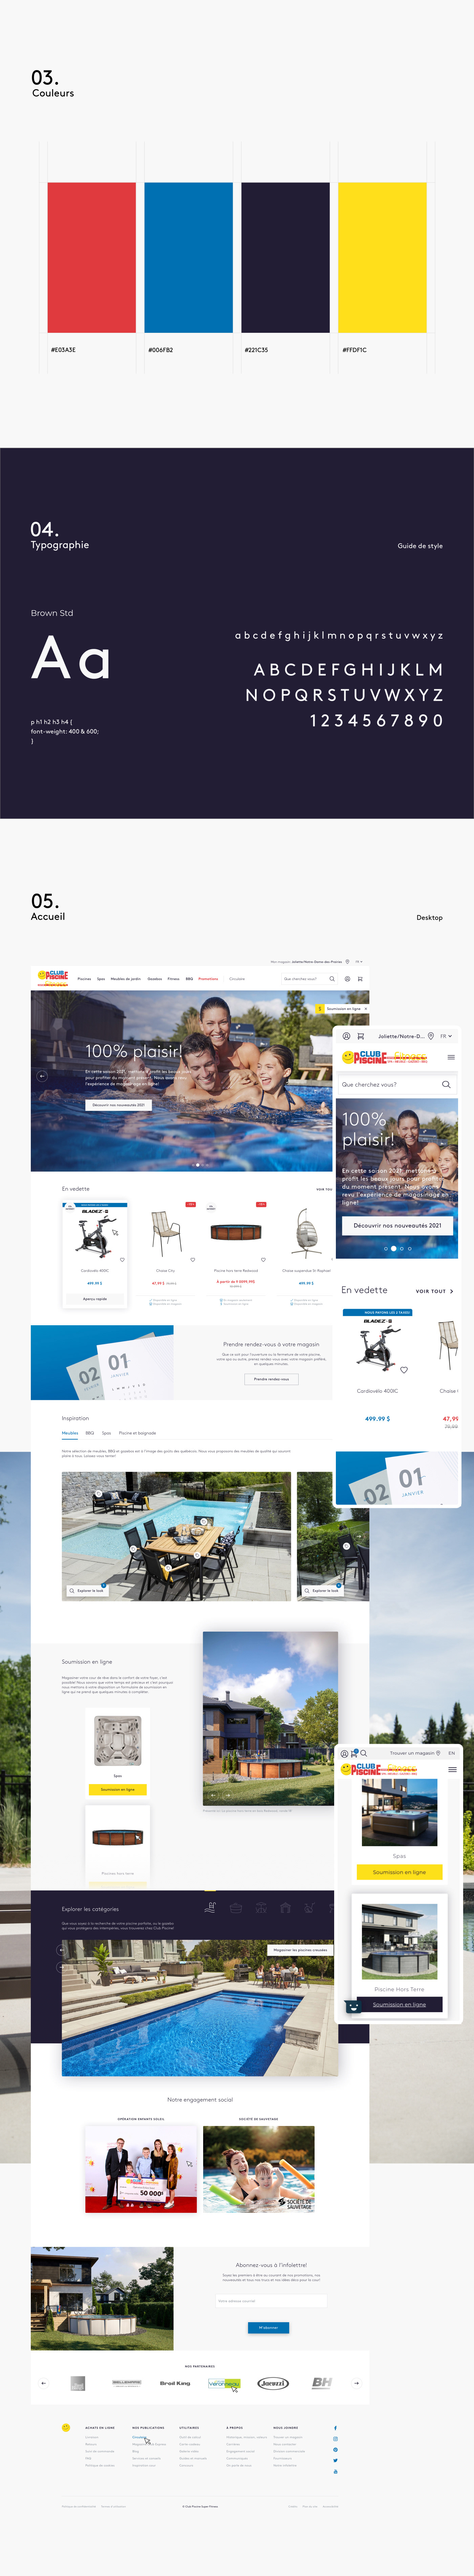 e-commerce online quote online store Pool customization redesign Responsive Design bold Forms Primary colors